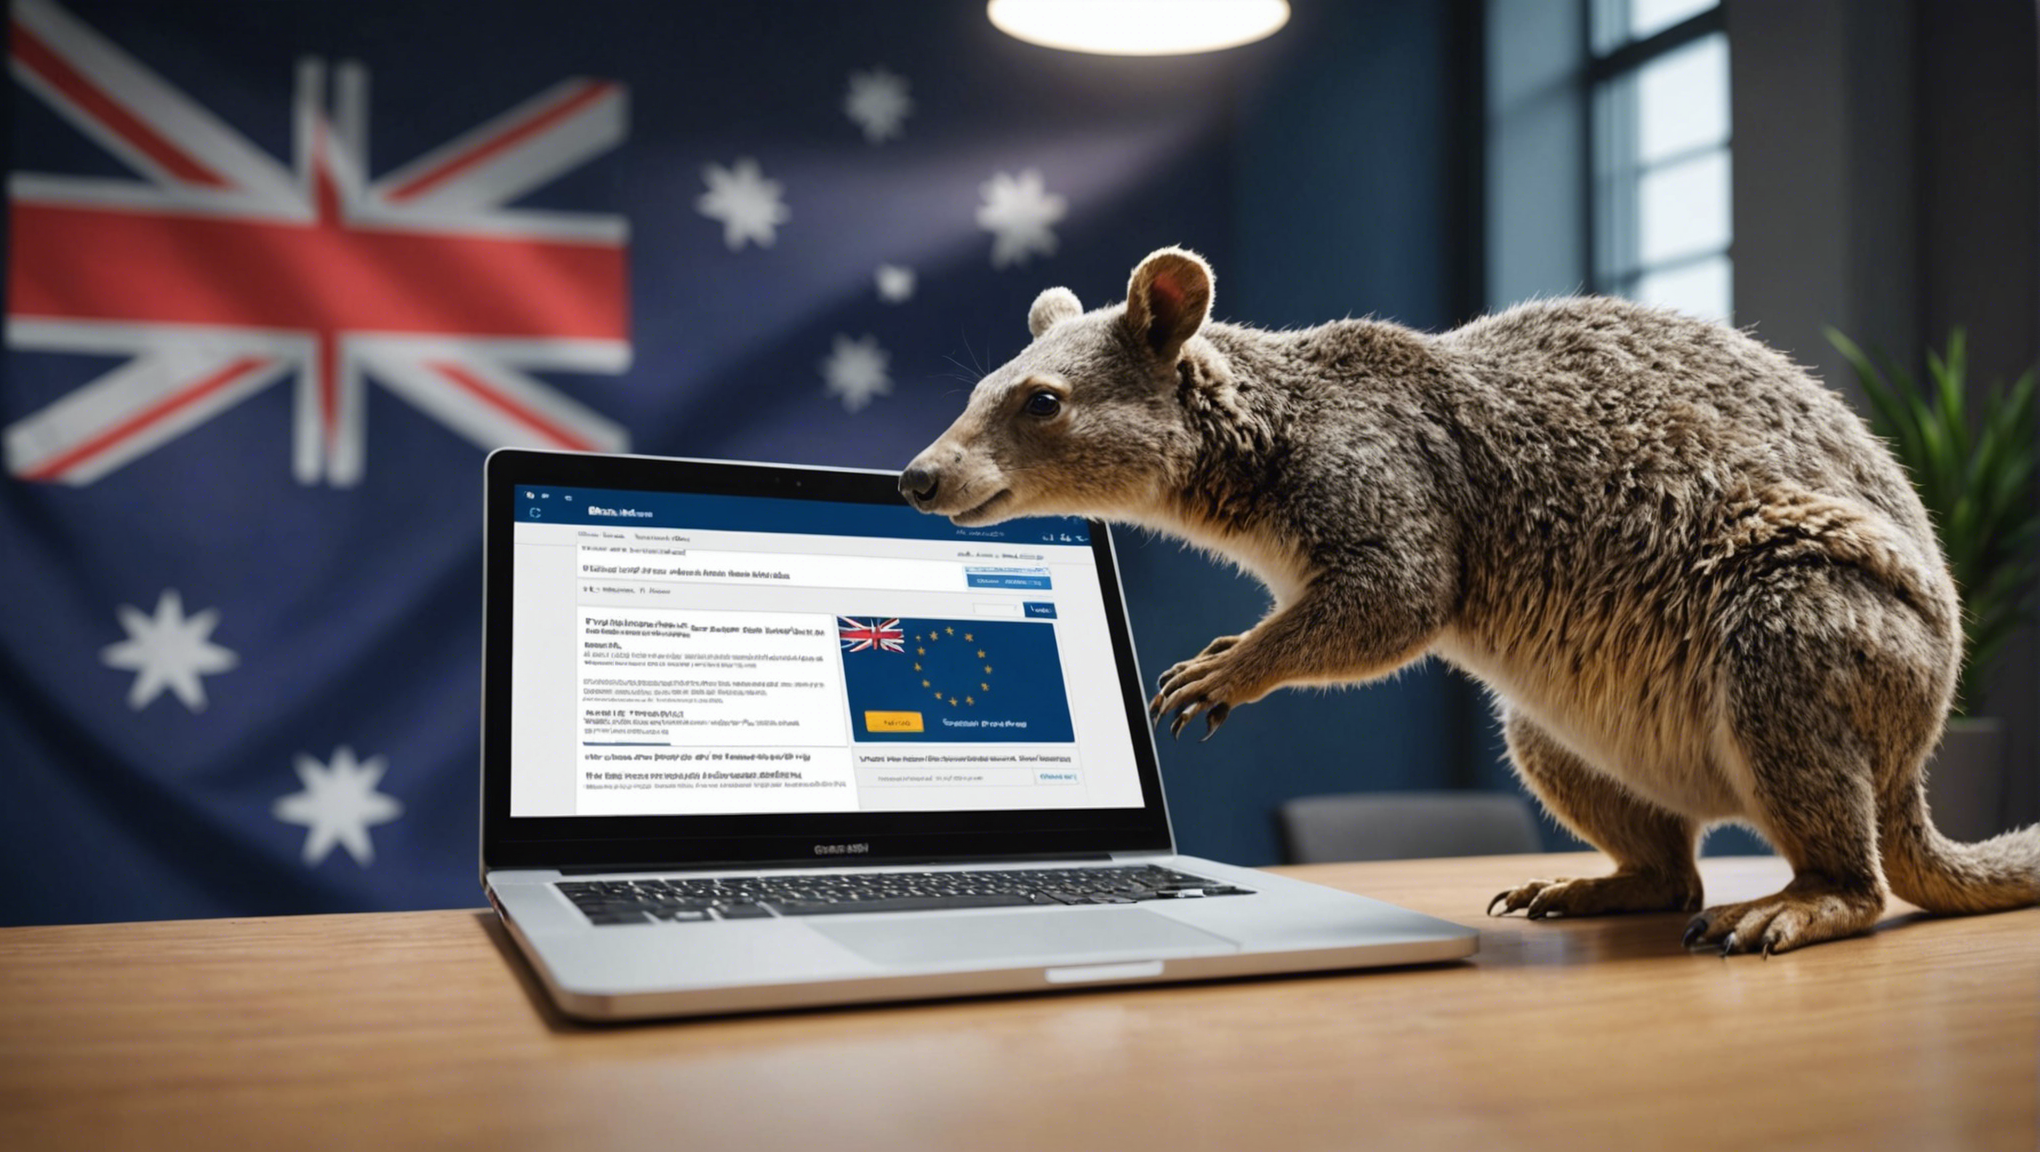 discover how the new australian bank partnership aims to thwart scammers and protect consumers. don't miss out on the latest update!